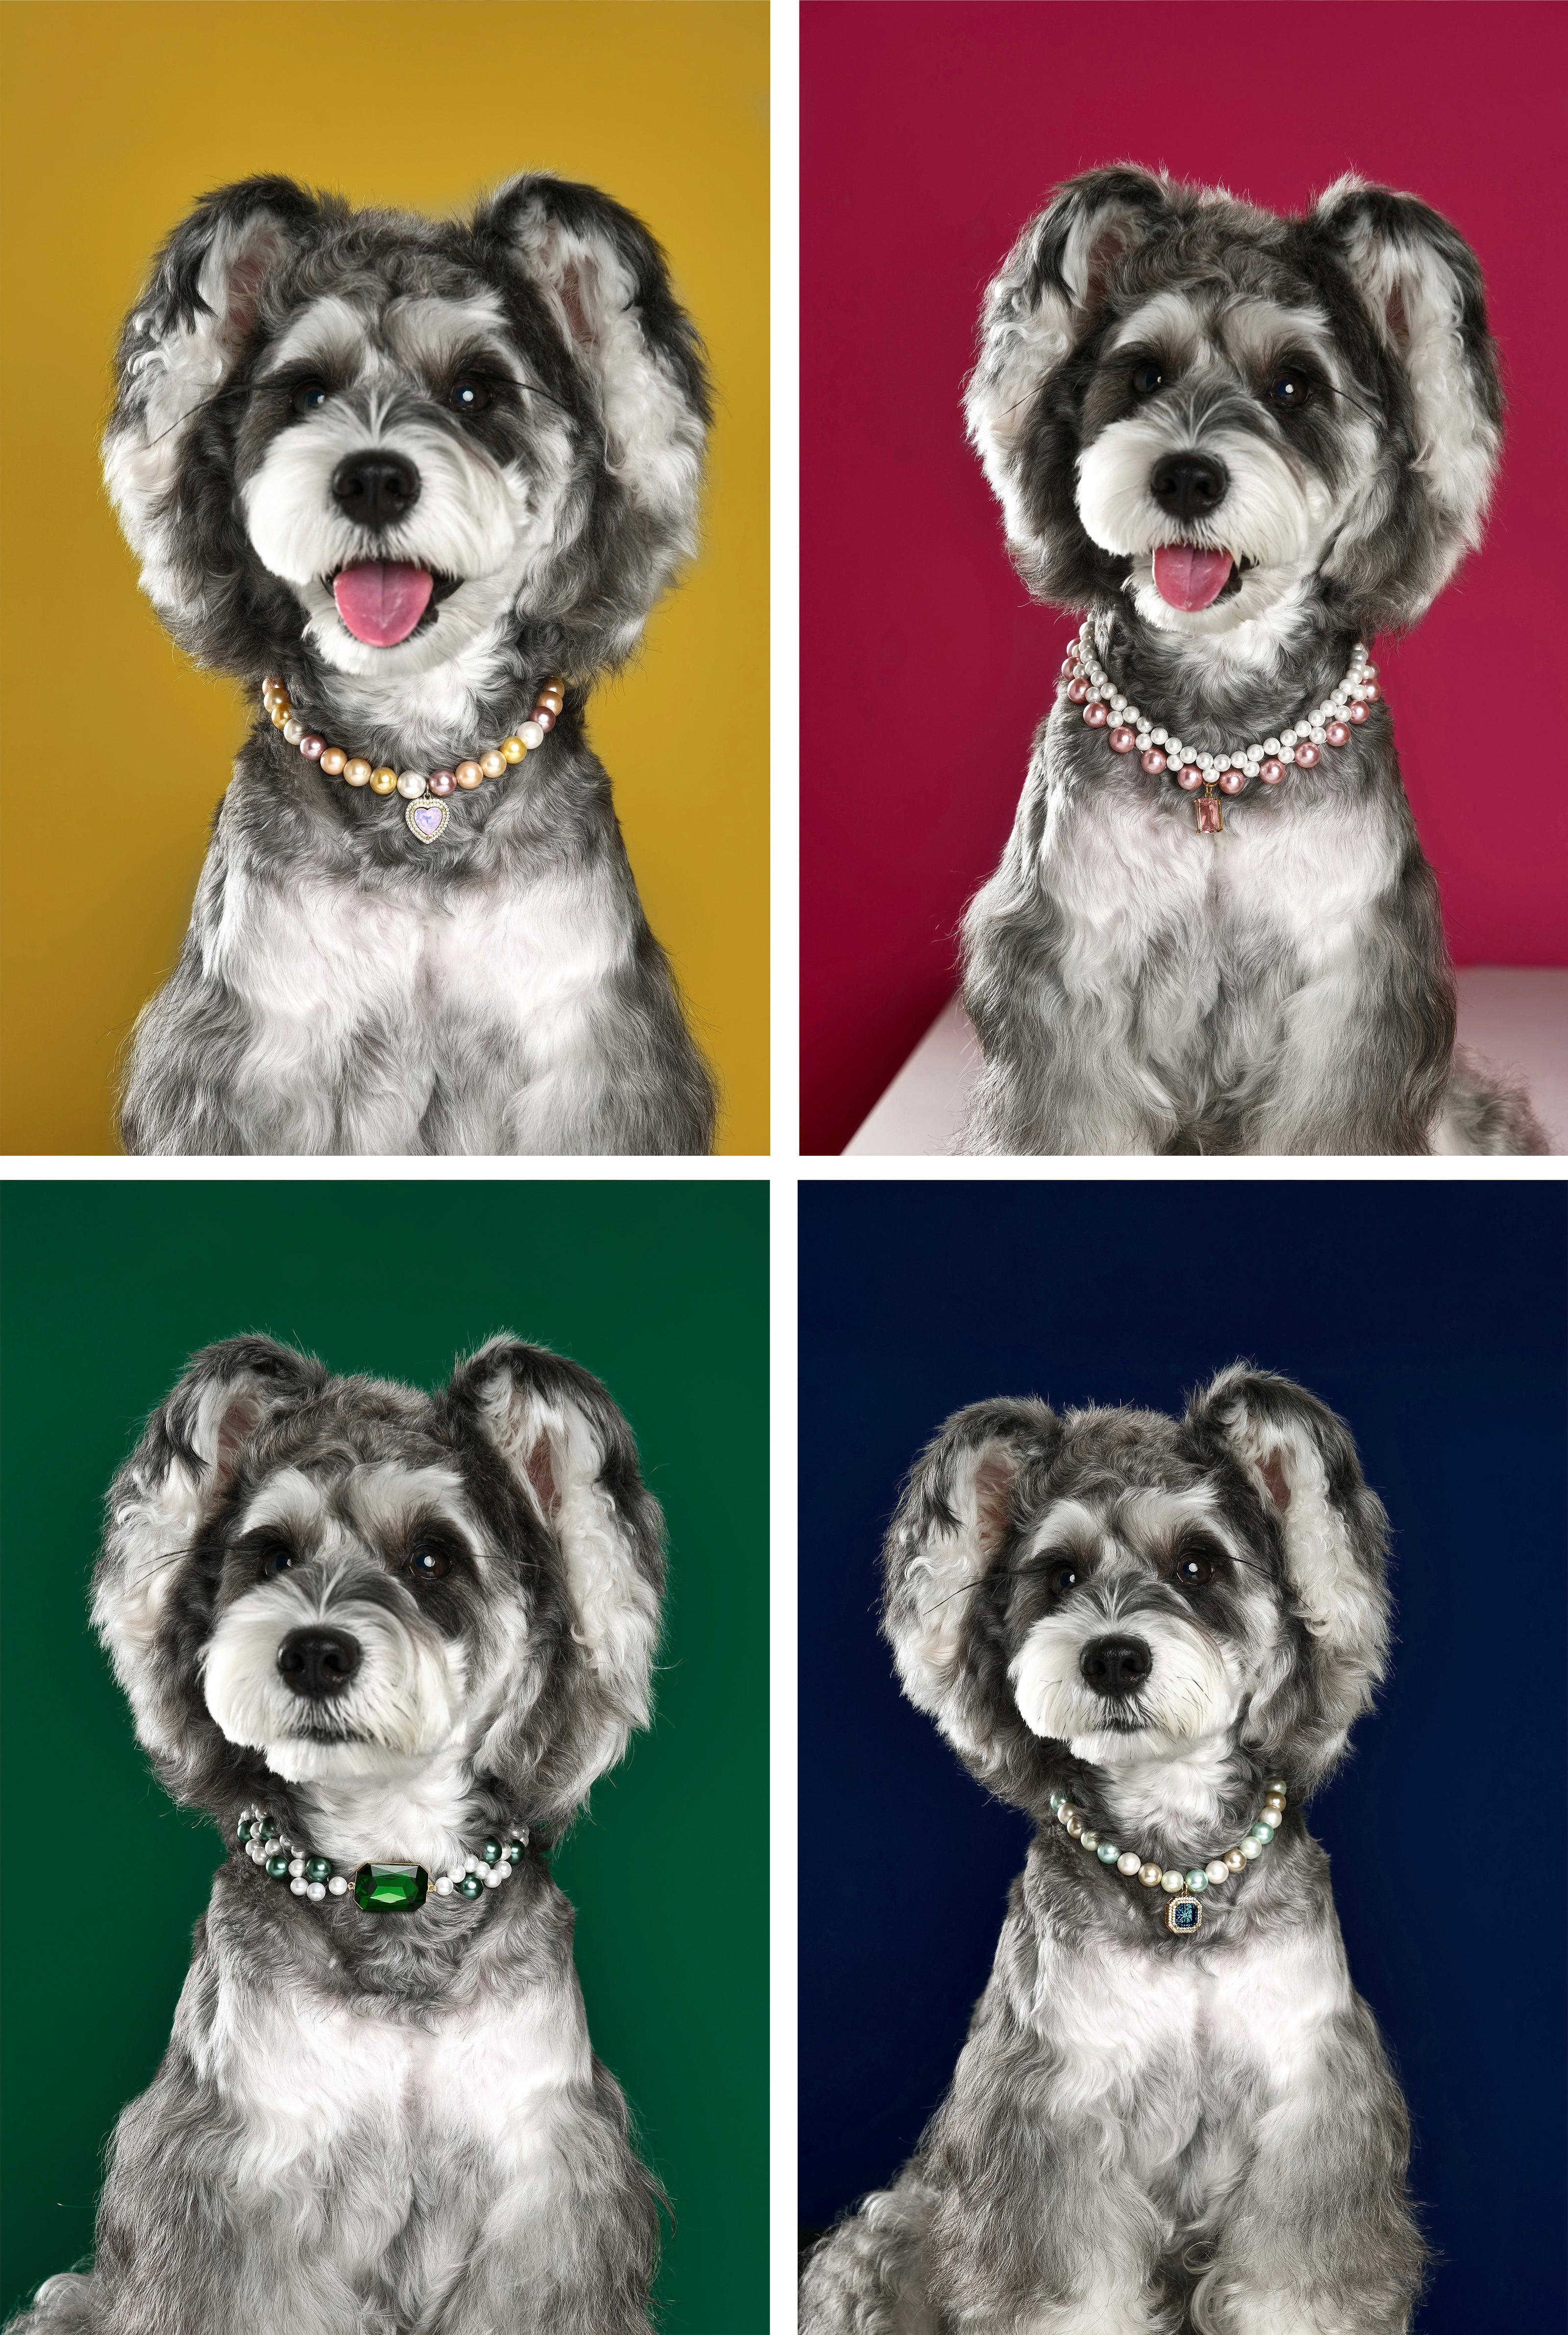 Vibrant display of the Variety Pet Pearl Necklace Collection on a cheerful dog, featuring necklaces with colorful pendants against vividly colored backgrounds. The collection includes pearls in shades of pink, green, and blue, perfect for adding a splash of style to any pet's wardrobe